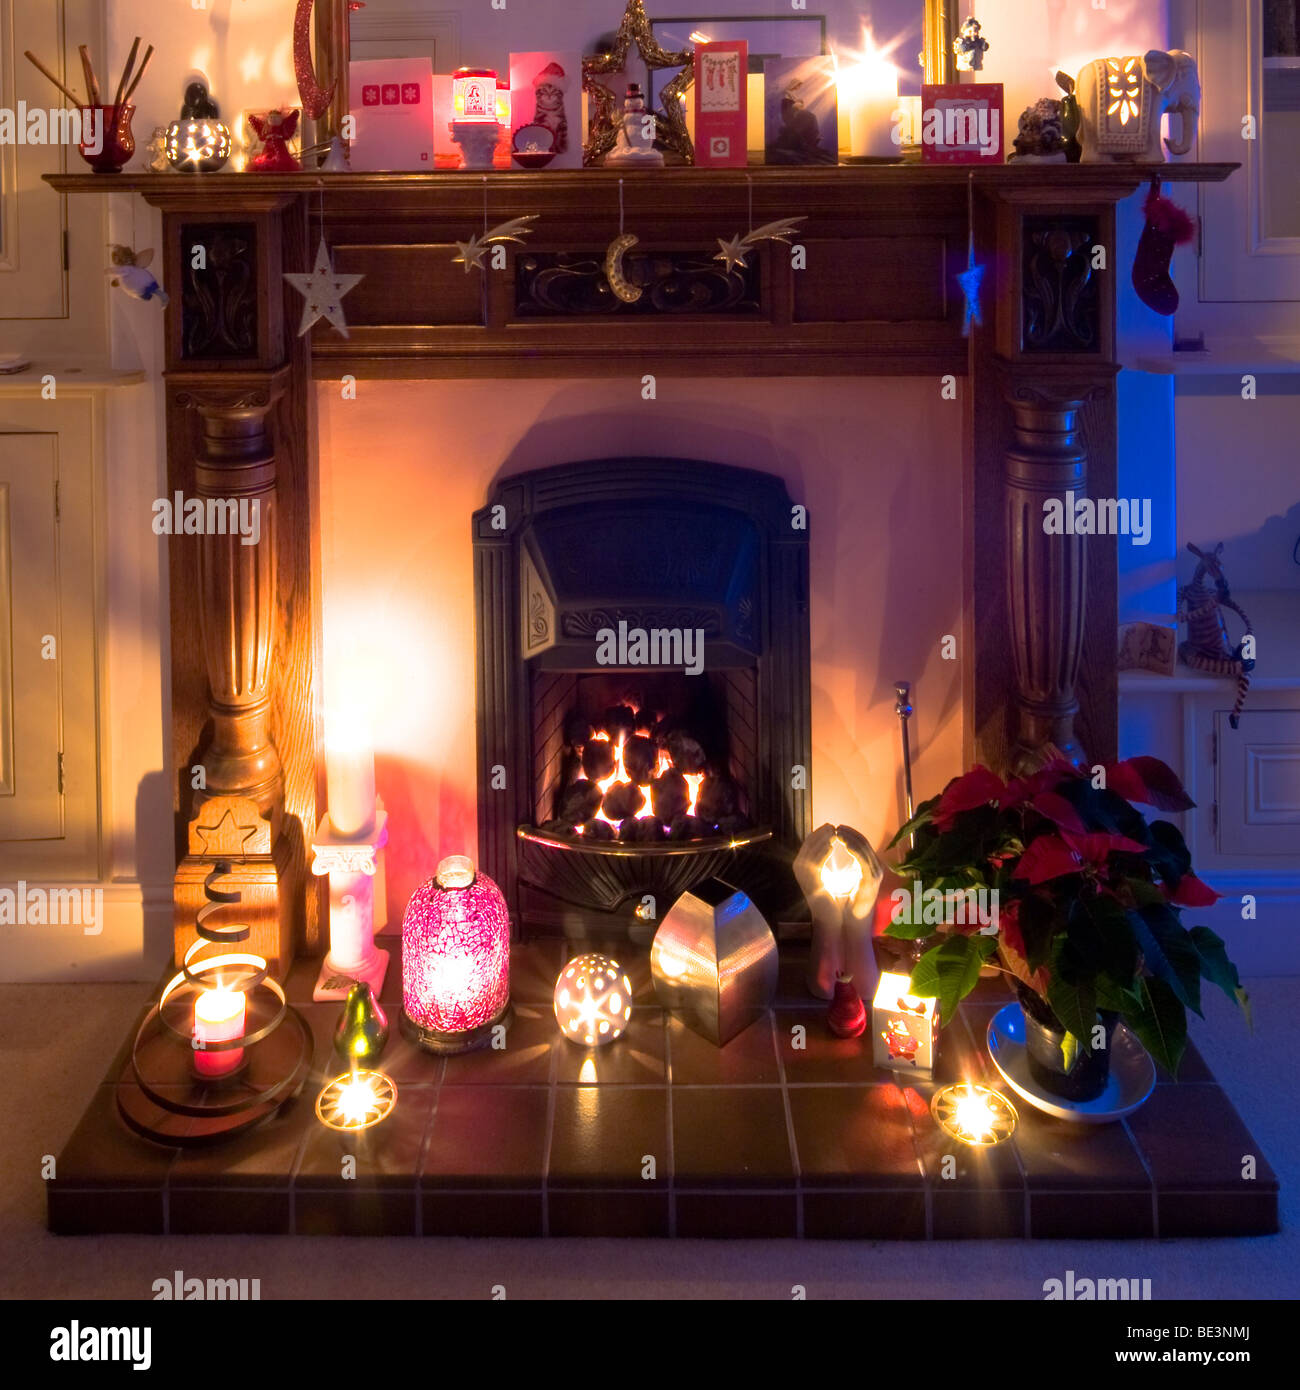 A fireplace at Christmas Time Stock Photo